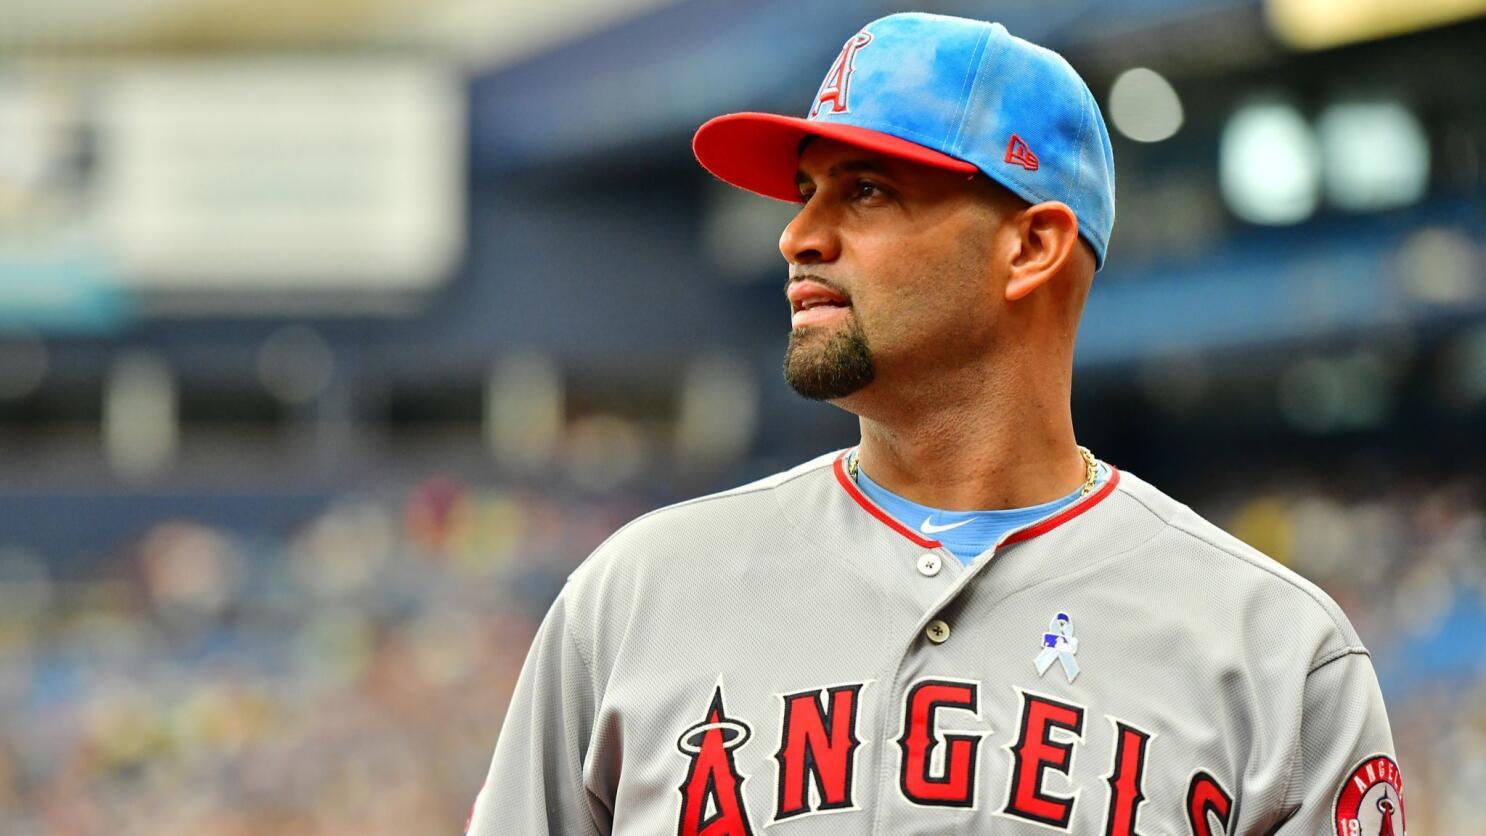 Albert Pujols - My Daughter has Down syndrome. Over the past